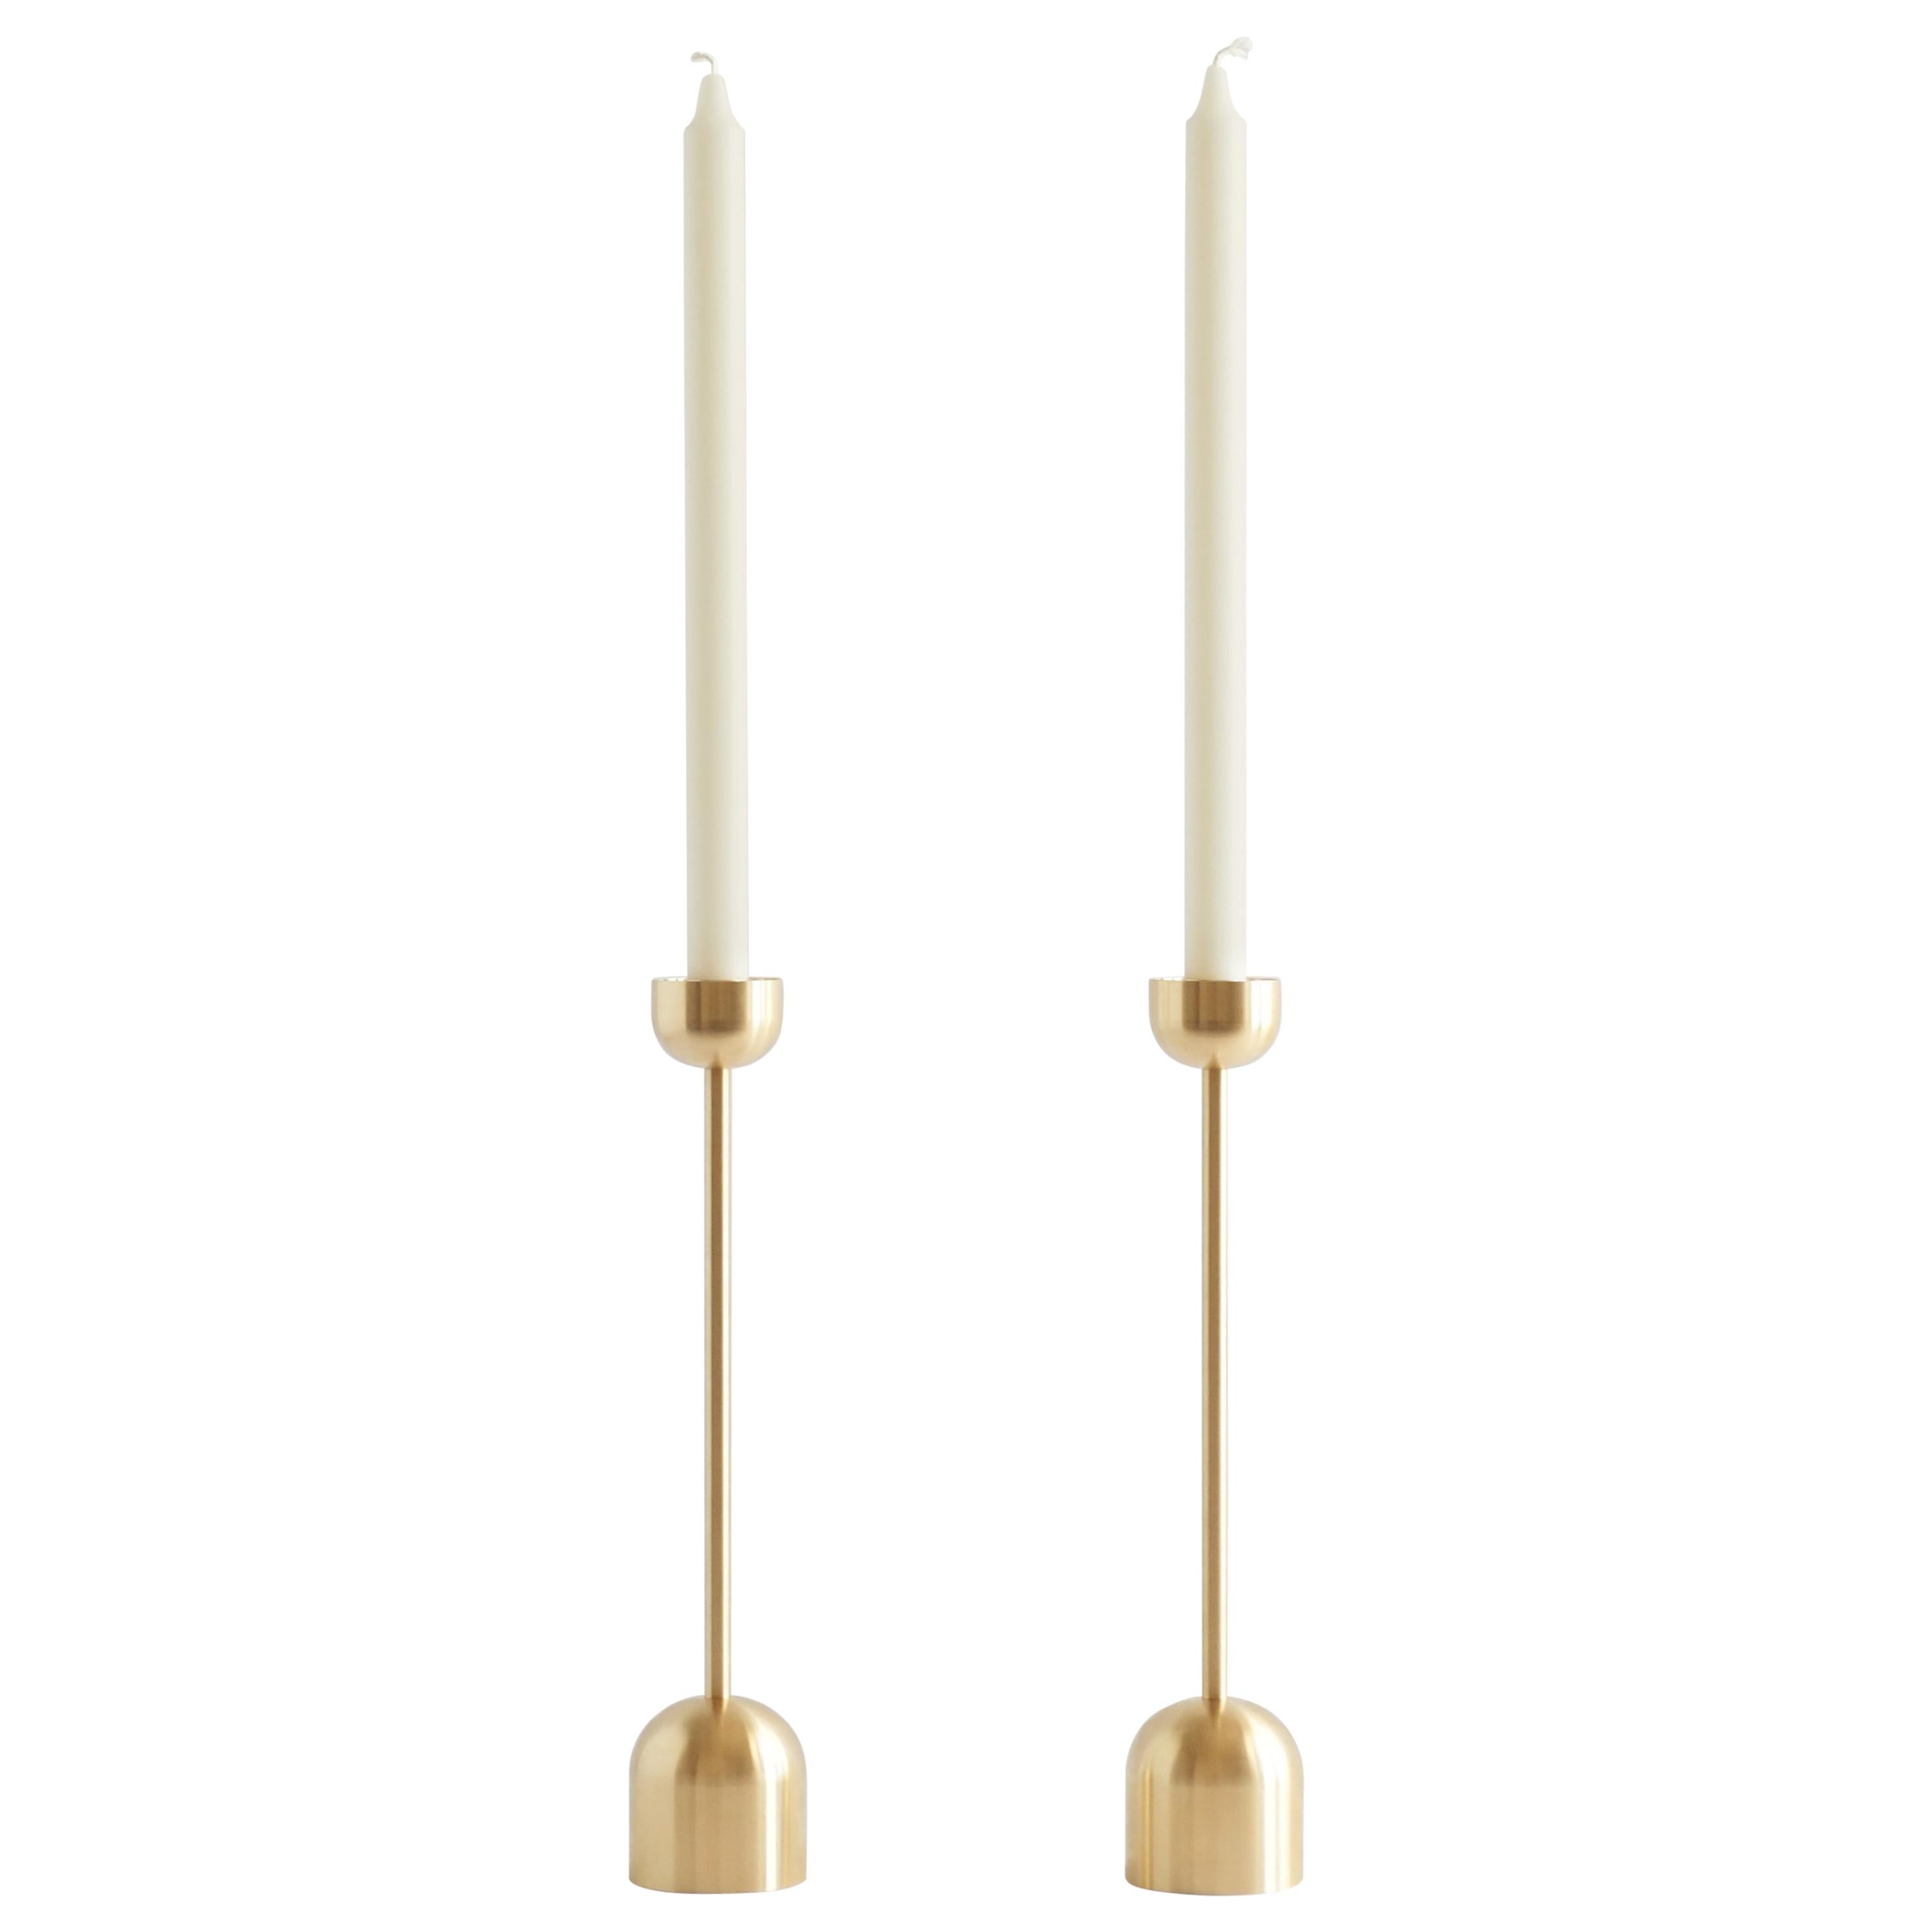 Large Contemporary Brass Cone Spindle Candle Holders
Pair of Candle Holders
Each candle holder: Height: 18 in. (45.72 cm) x Width: 2.5 in. (6.35 cm) x Depth: 2.5 in. (6.35 cm)

Small Contemporary Brass Dome Spindle Candleholders
Pair of Candle